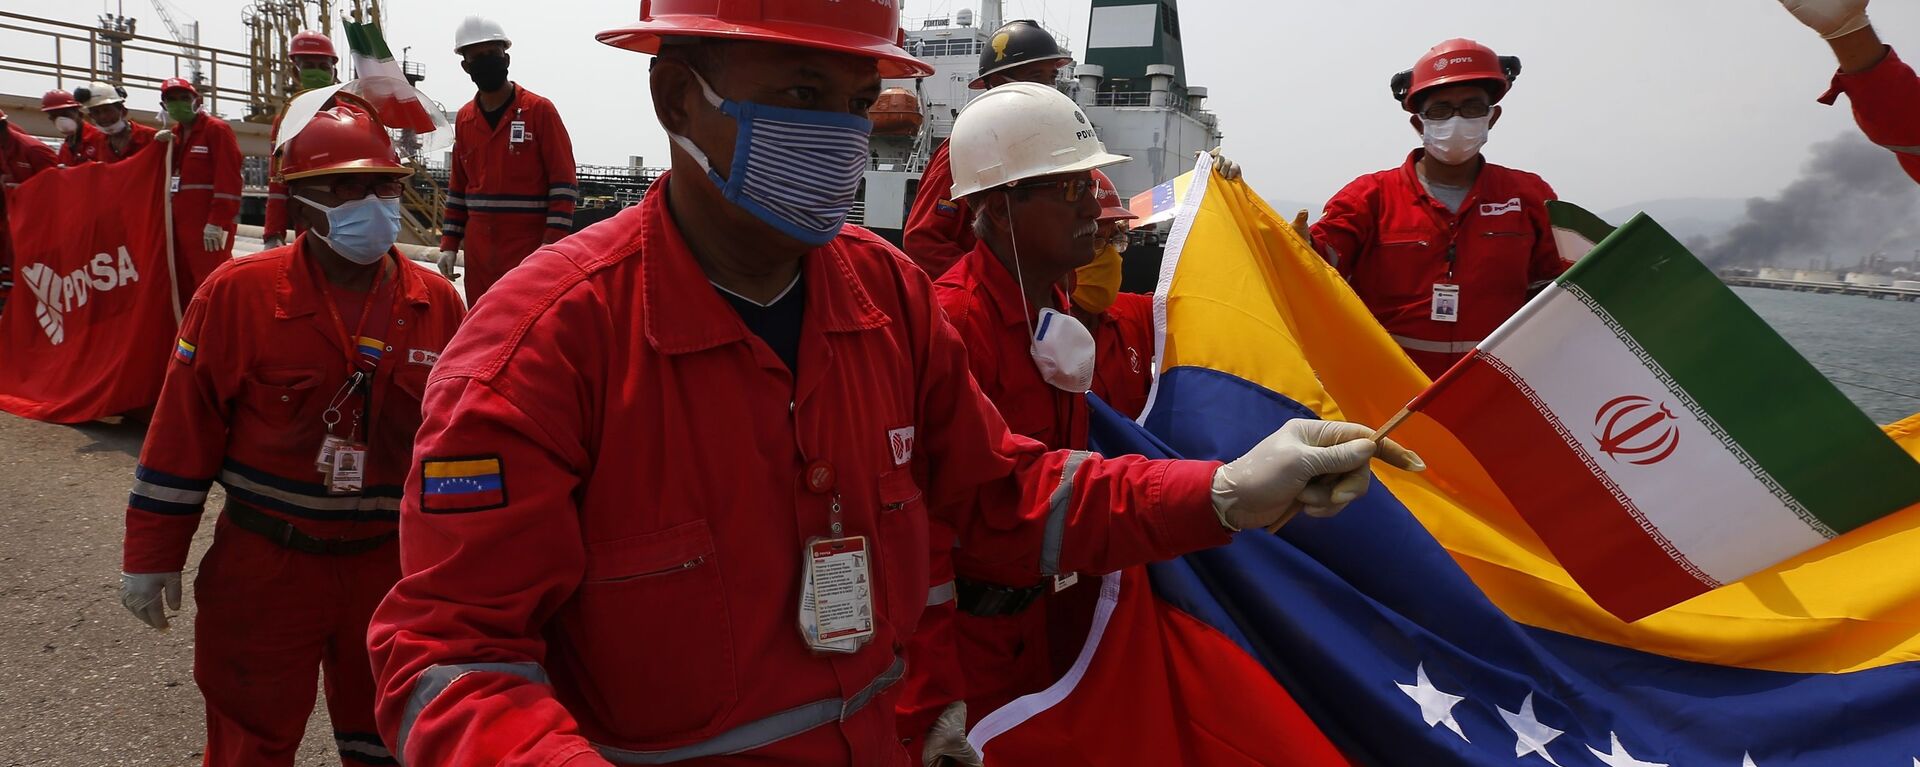 A Venezuelan oil worker holding a small Iranian flag attends a ceremony for the arrival of Iranian oil tanker Fortune at the El Palito refinery near Puerto Cabello, Venezuela, 25 May 2020 - Sputnik International, 1920, 24.09.2020